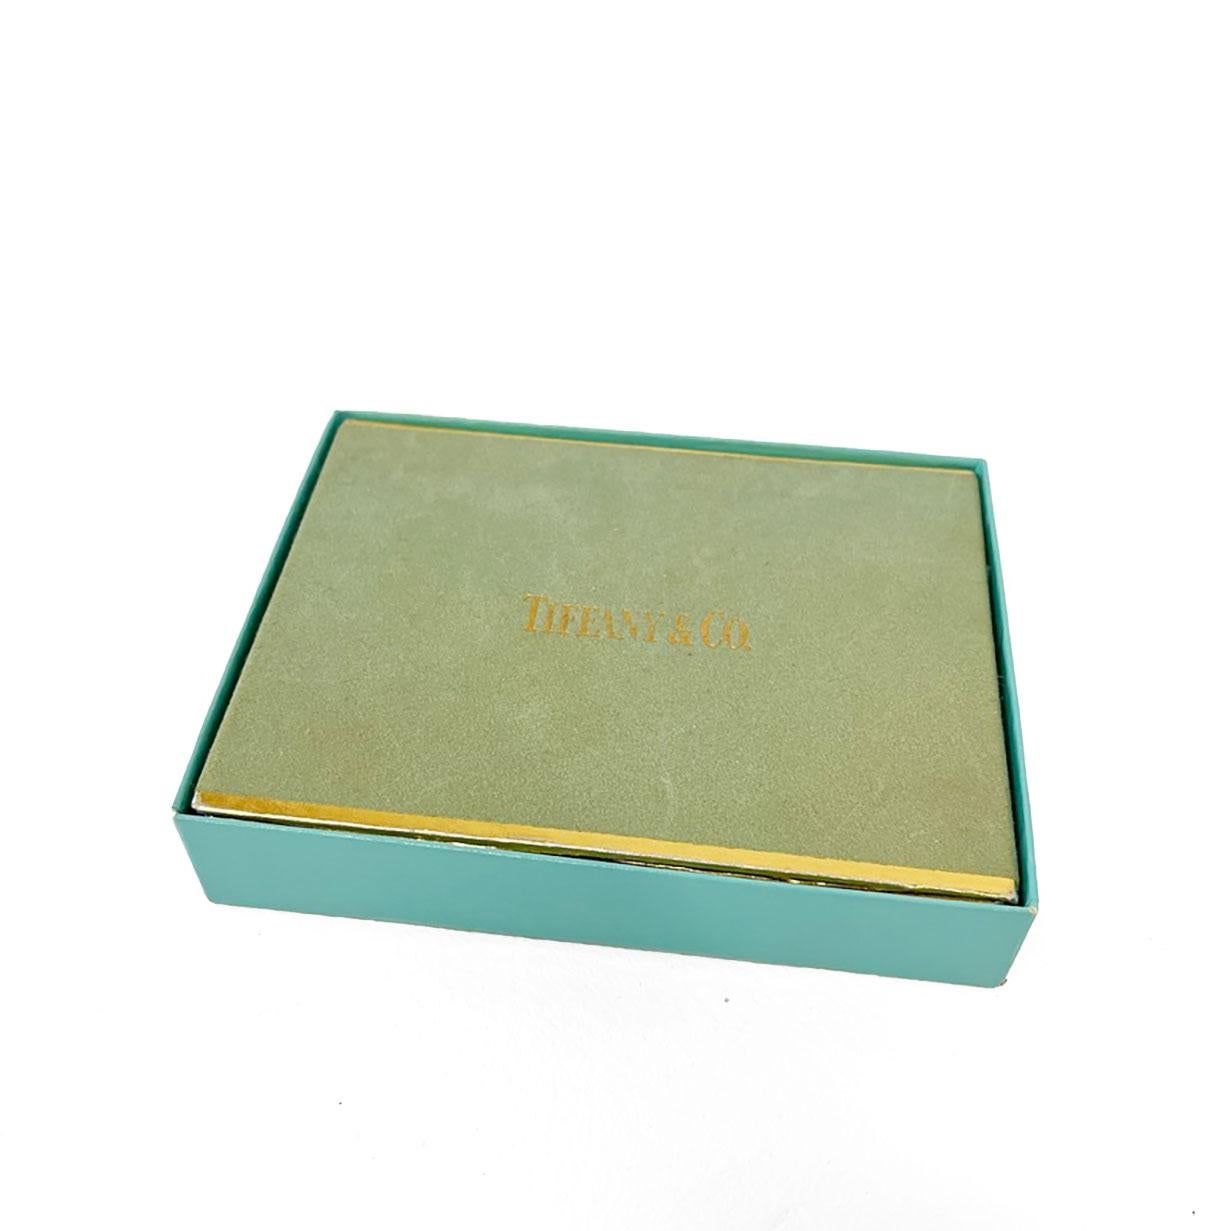 Exclusive Set of 2 Decks Playing Cards, original Tiffany & Co New York with intact velvet box and branded Tiffany & Co box cover. Unique cards signed Tiffany & Co, sold only in New York in the 70s but I found them in Italy